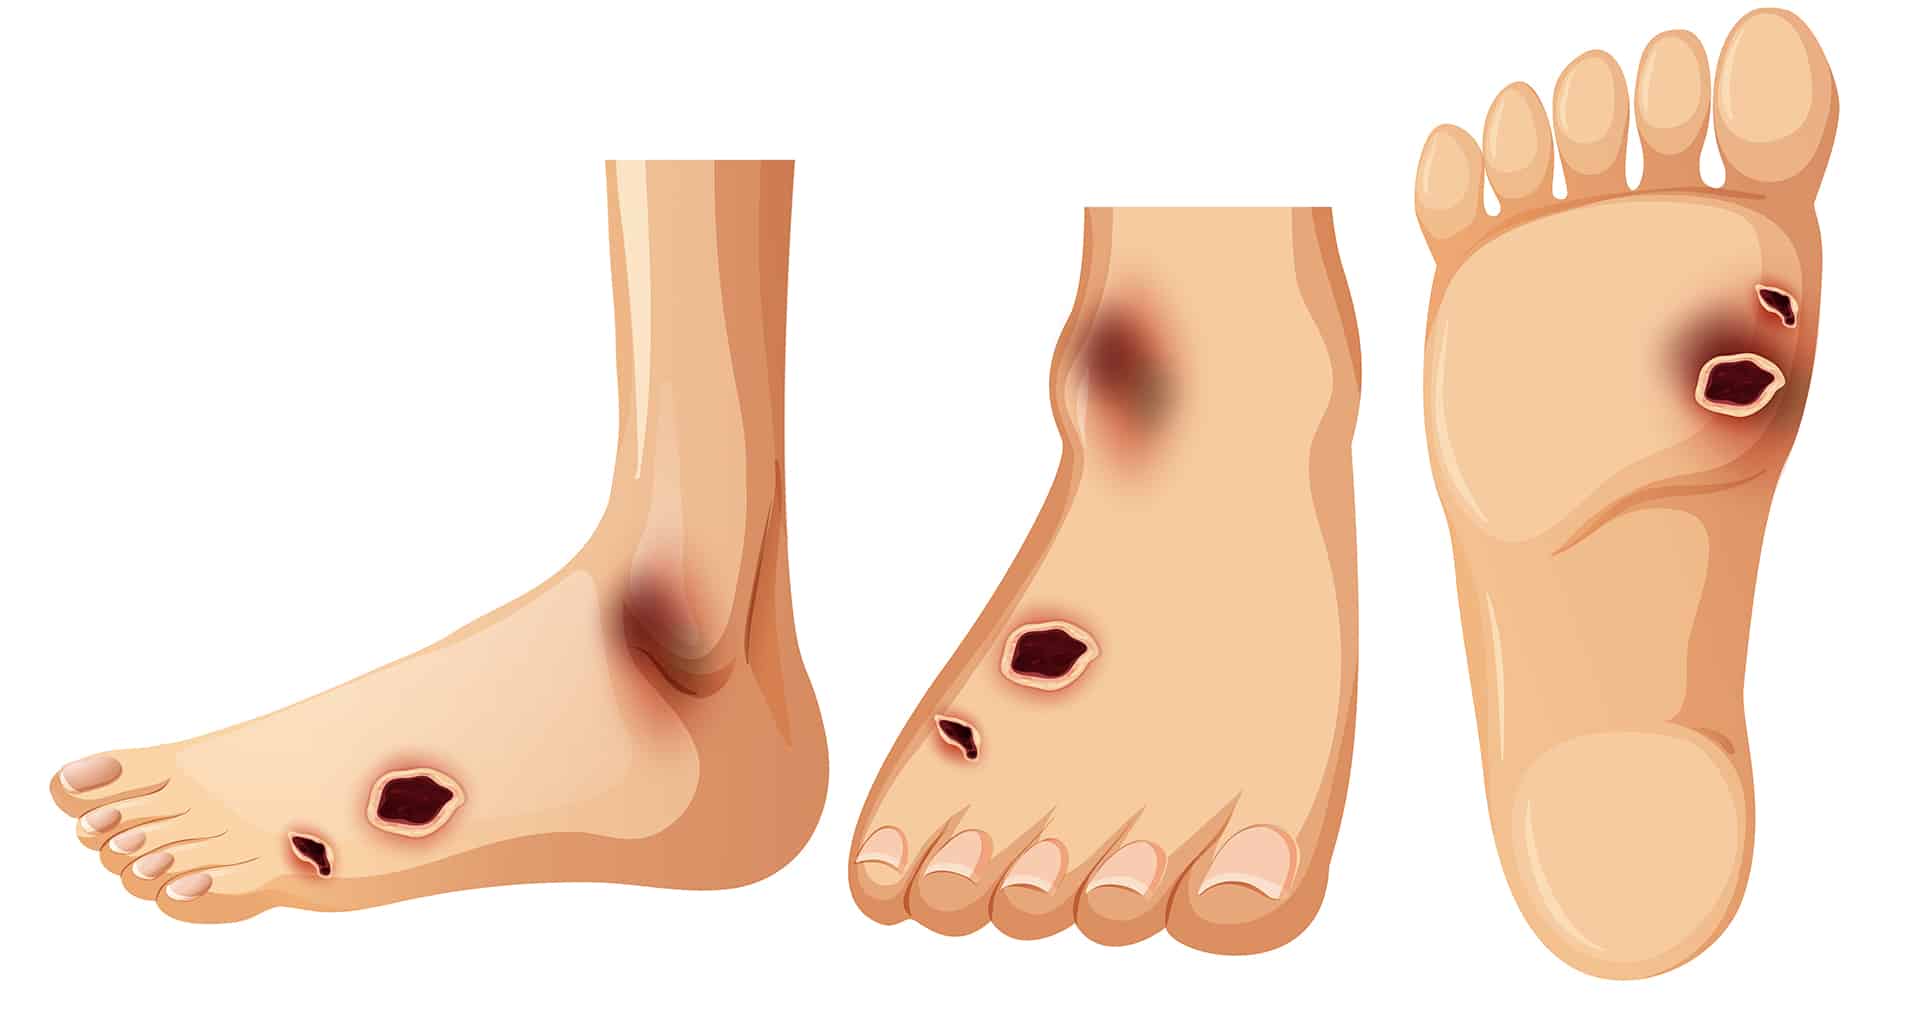 diabetic-foot-featured-image